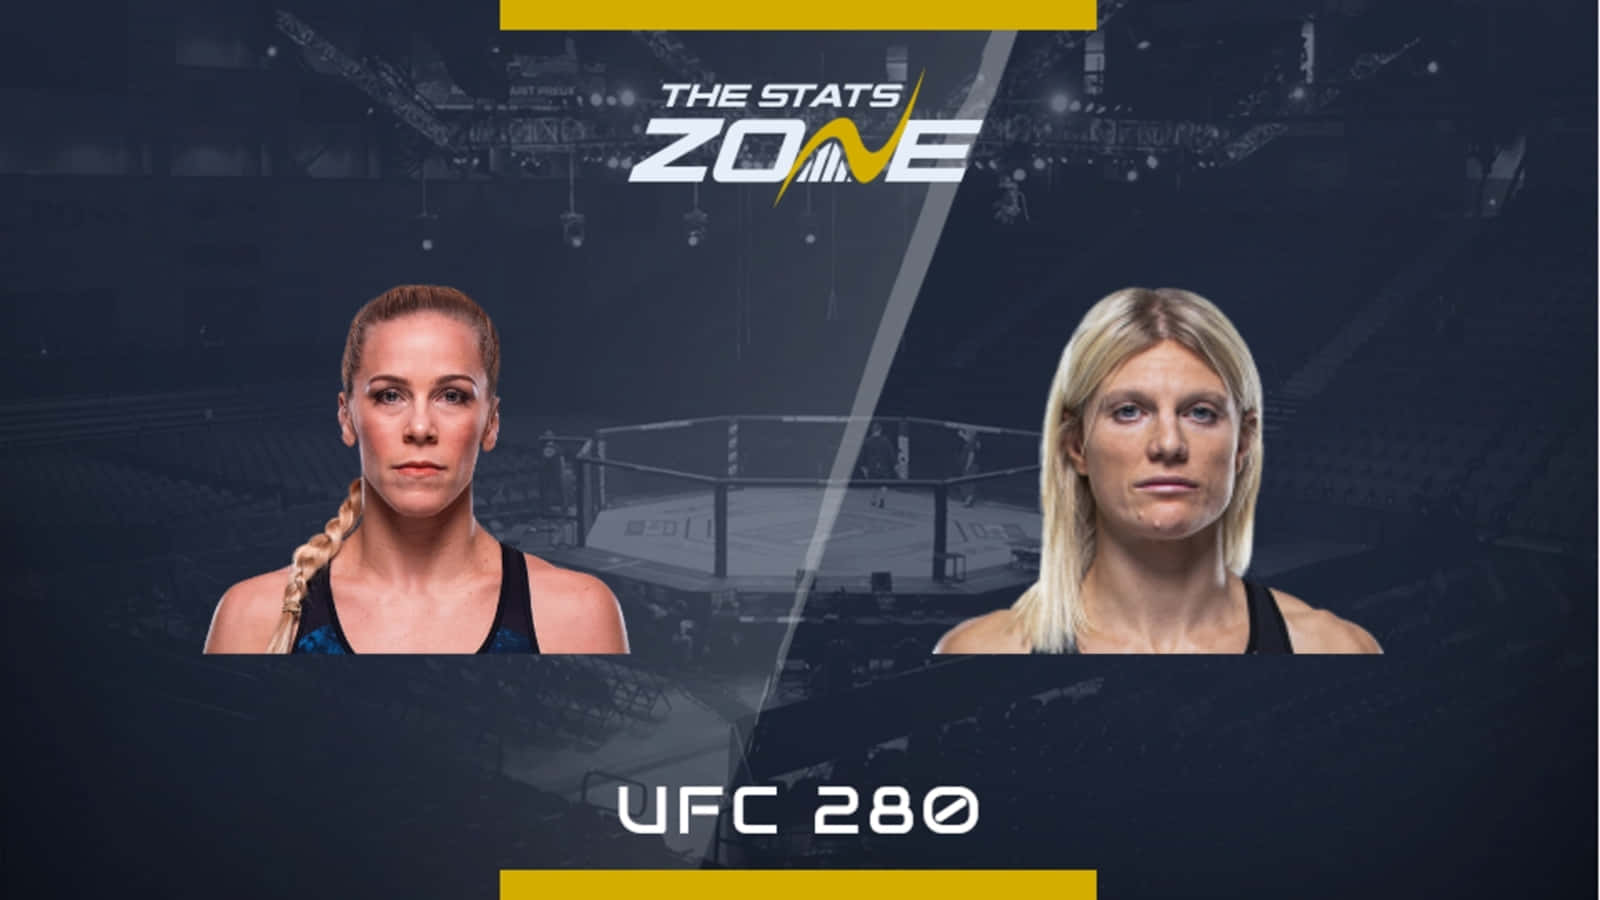 Katlynchookagian Ufc 280 Match Would Be Translated To 